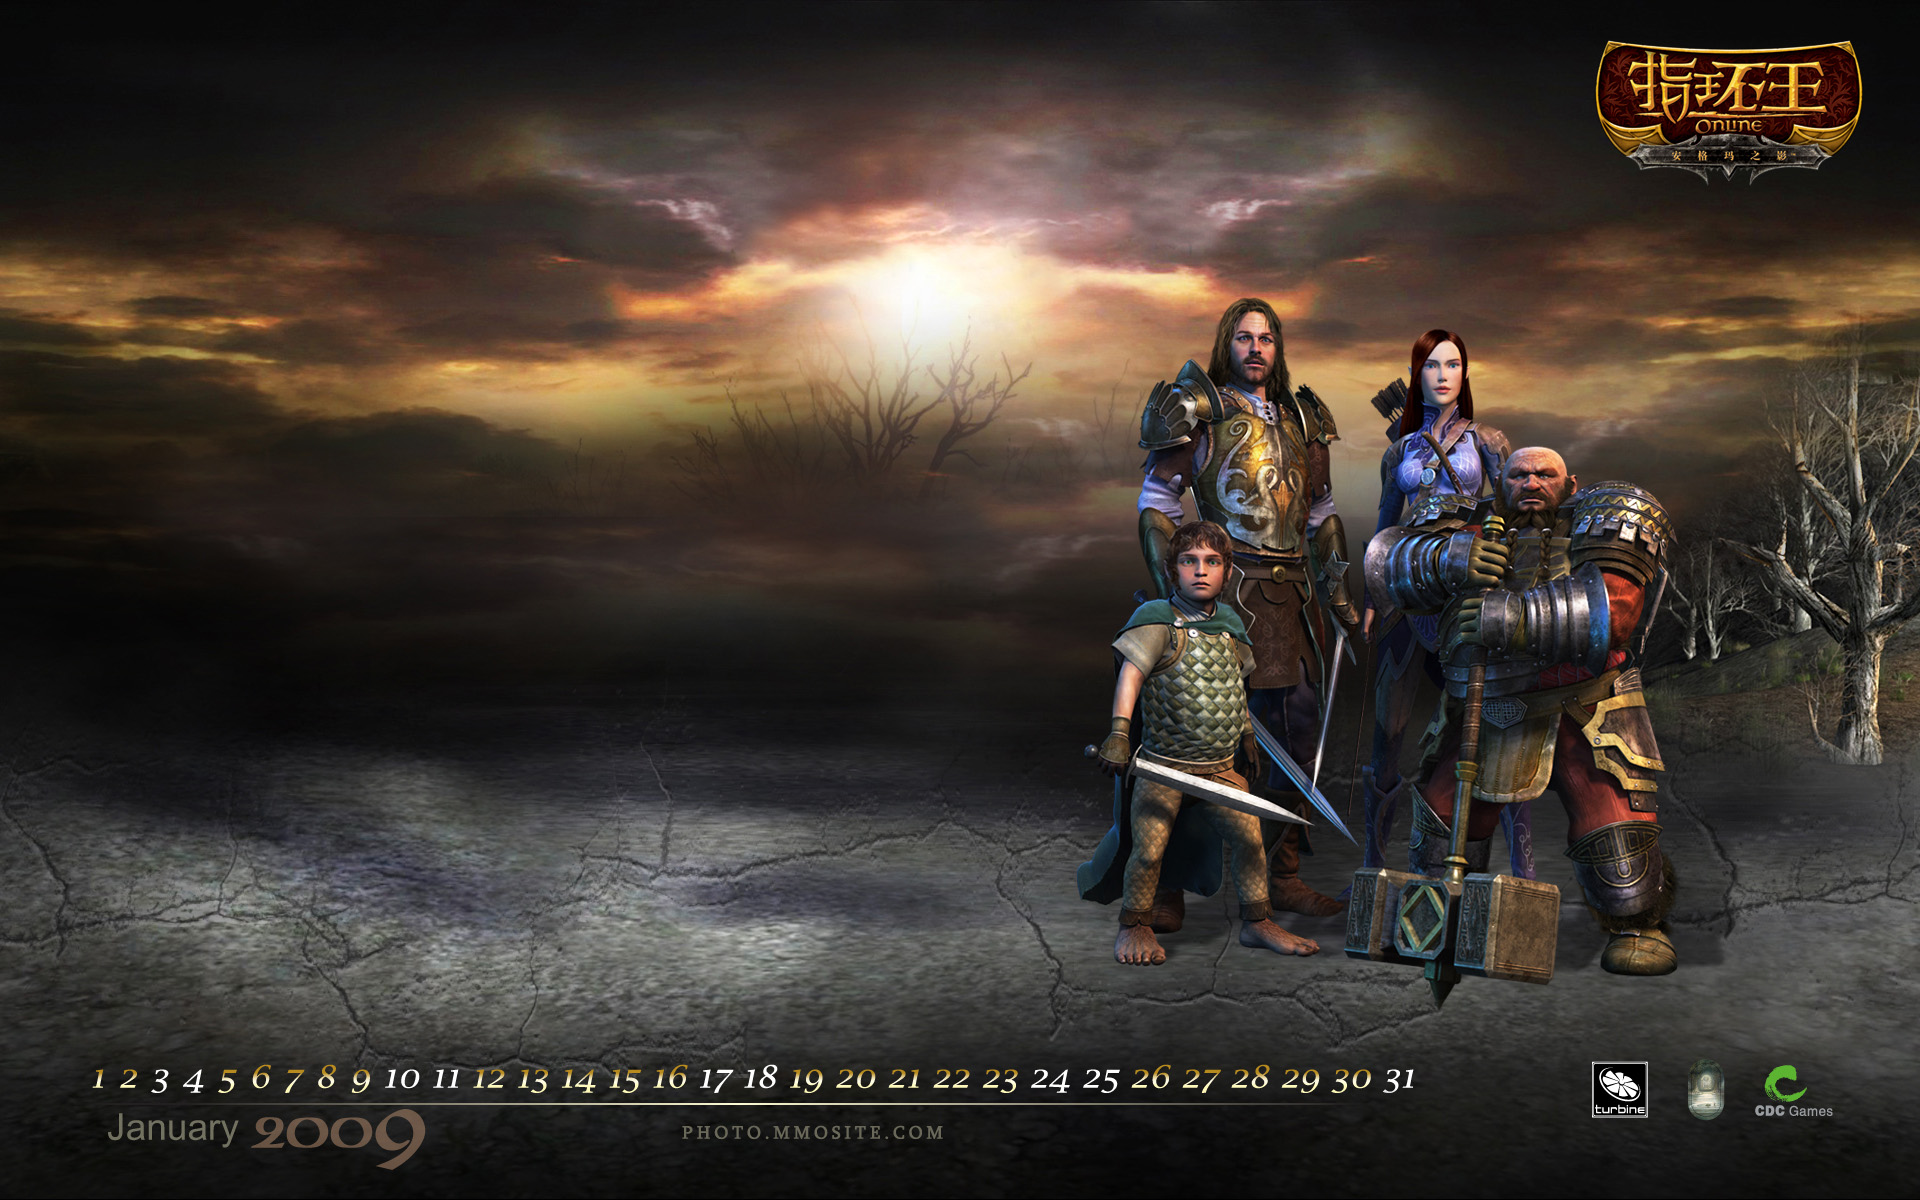 January Calendar The Lord Of Rings Online Wallpaper